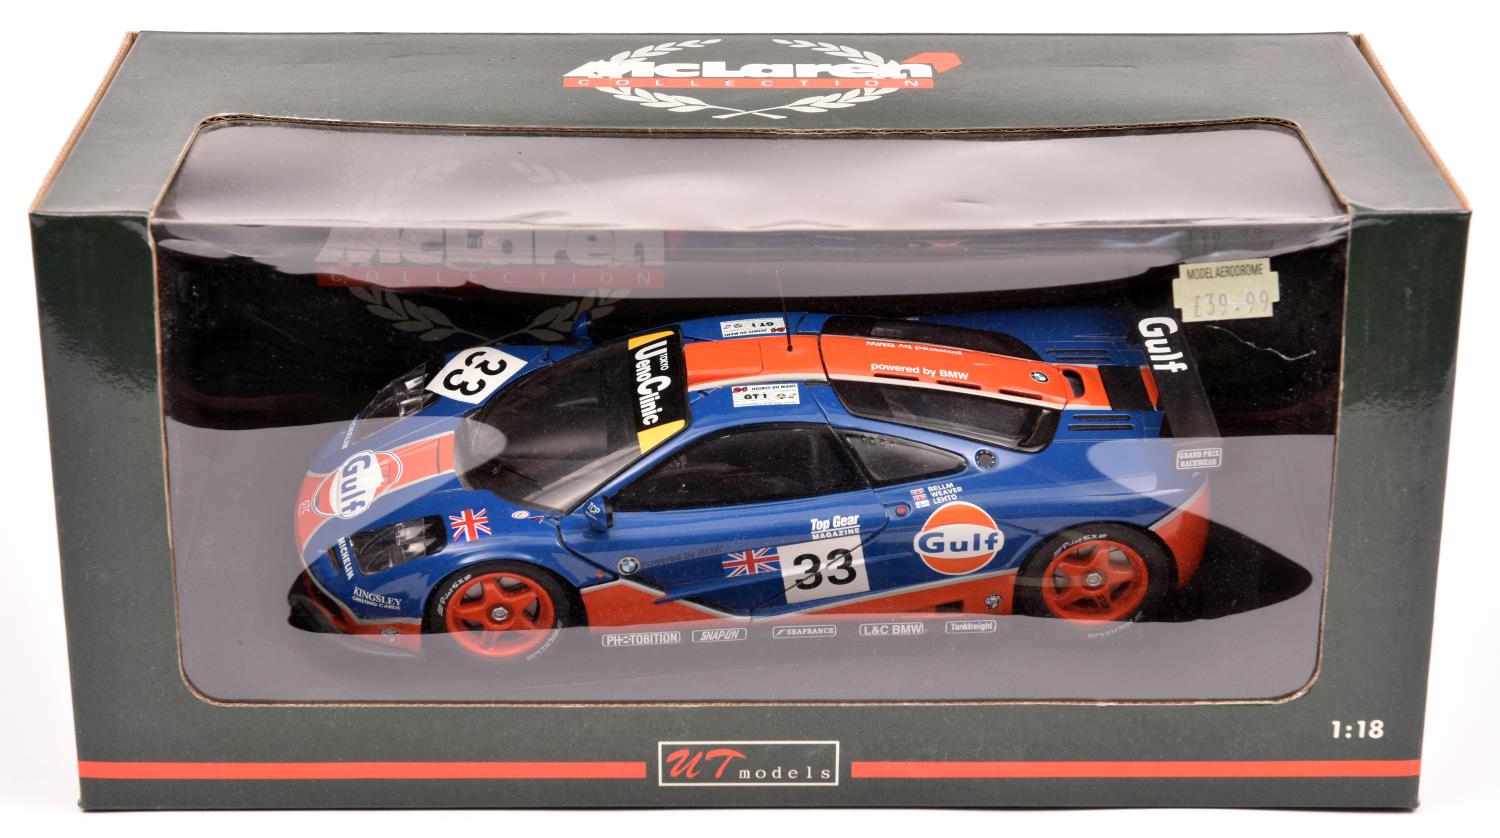 UT Models 1:18 scale 'McLaren Collection' McLaren F1 Le Mans Racing Car. An example in GULF blue and